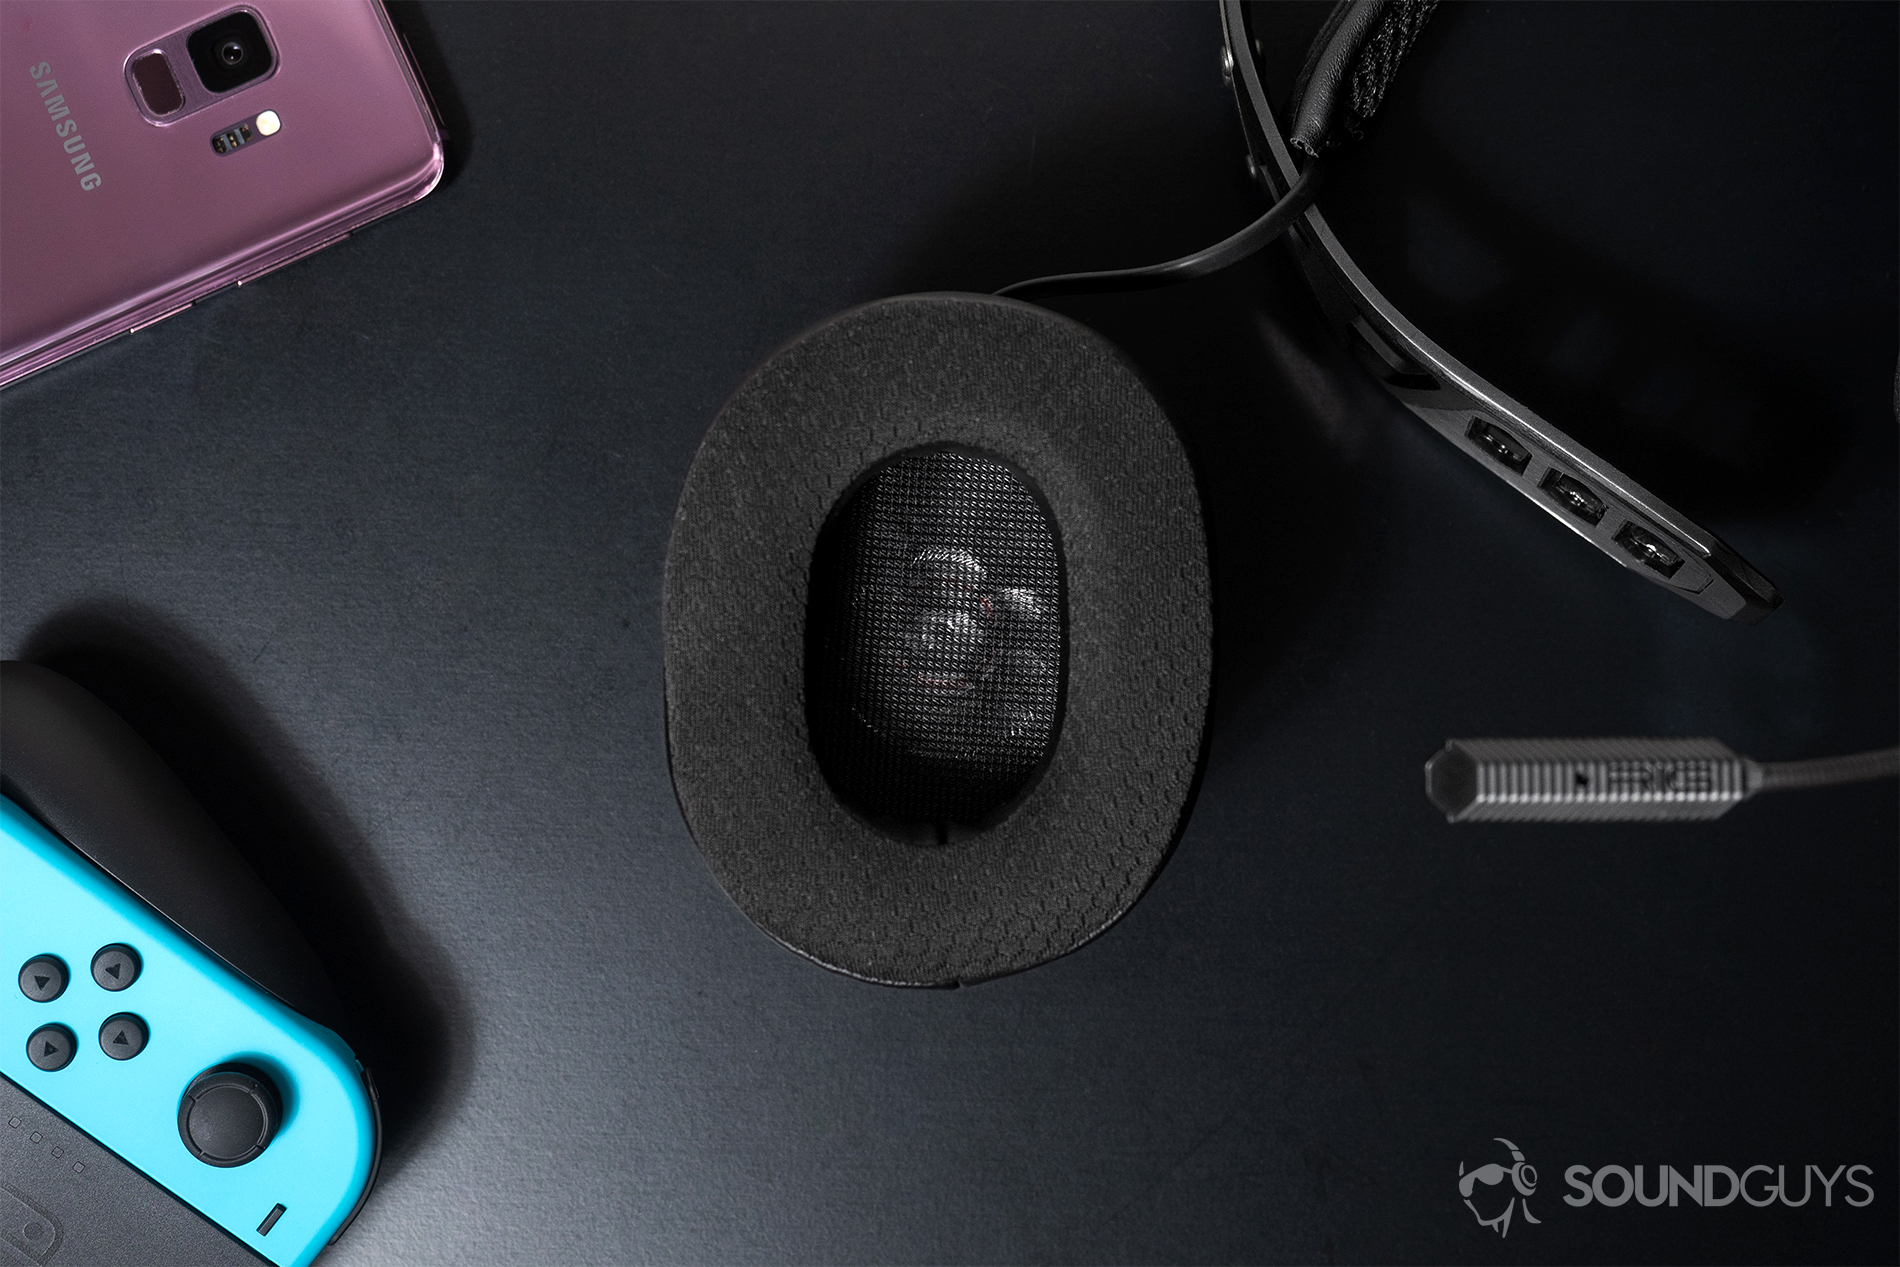 Top-down image of the detachable ear cup, both are detachable, with a Nintendo Switch in the bottom left corner and a Samsug S9 (lilac) in the top left corner of the image.